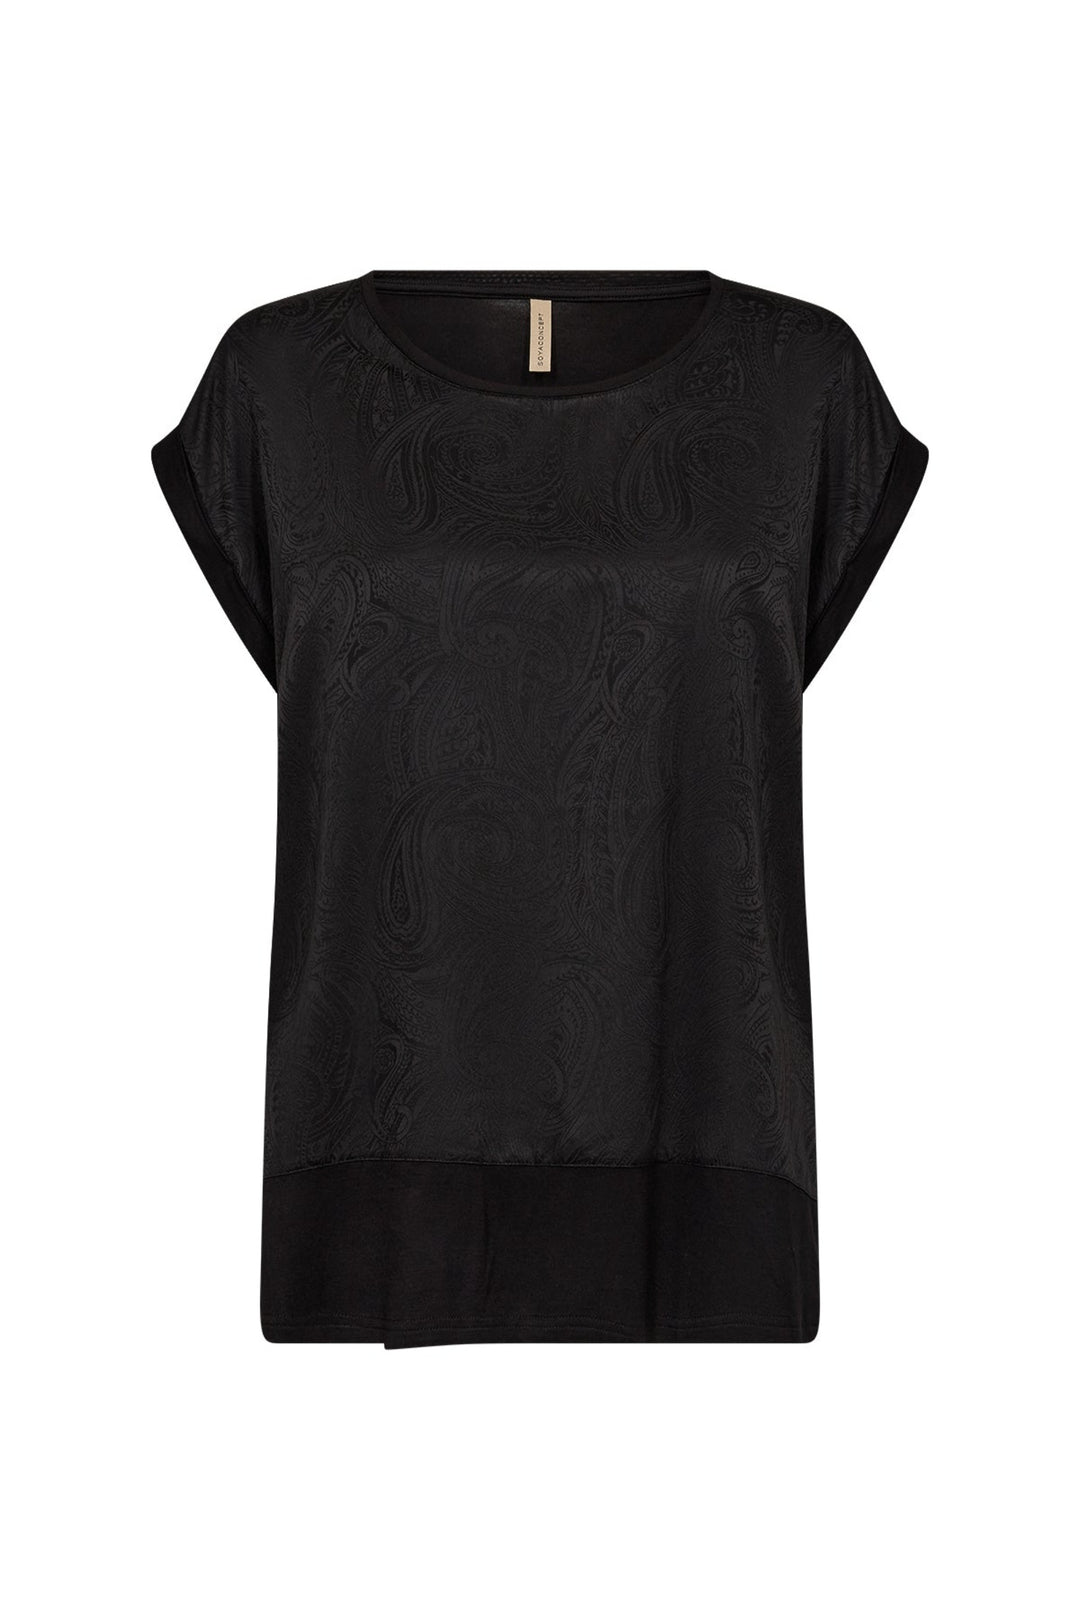 Soya Concept Fall 2024 This versatile Satin Paisley Front Tee offers endless styling options with its subtle satin shine, contrast plain back, and light, relaxed fit. 